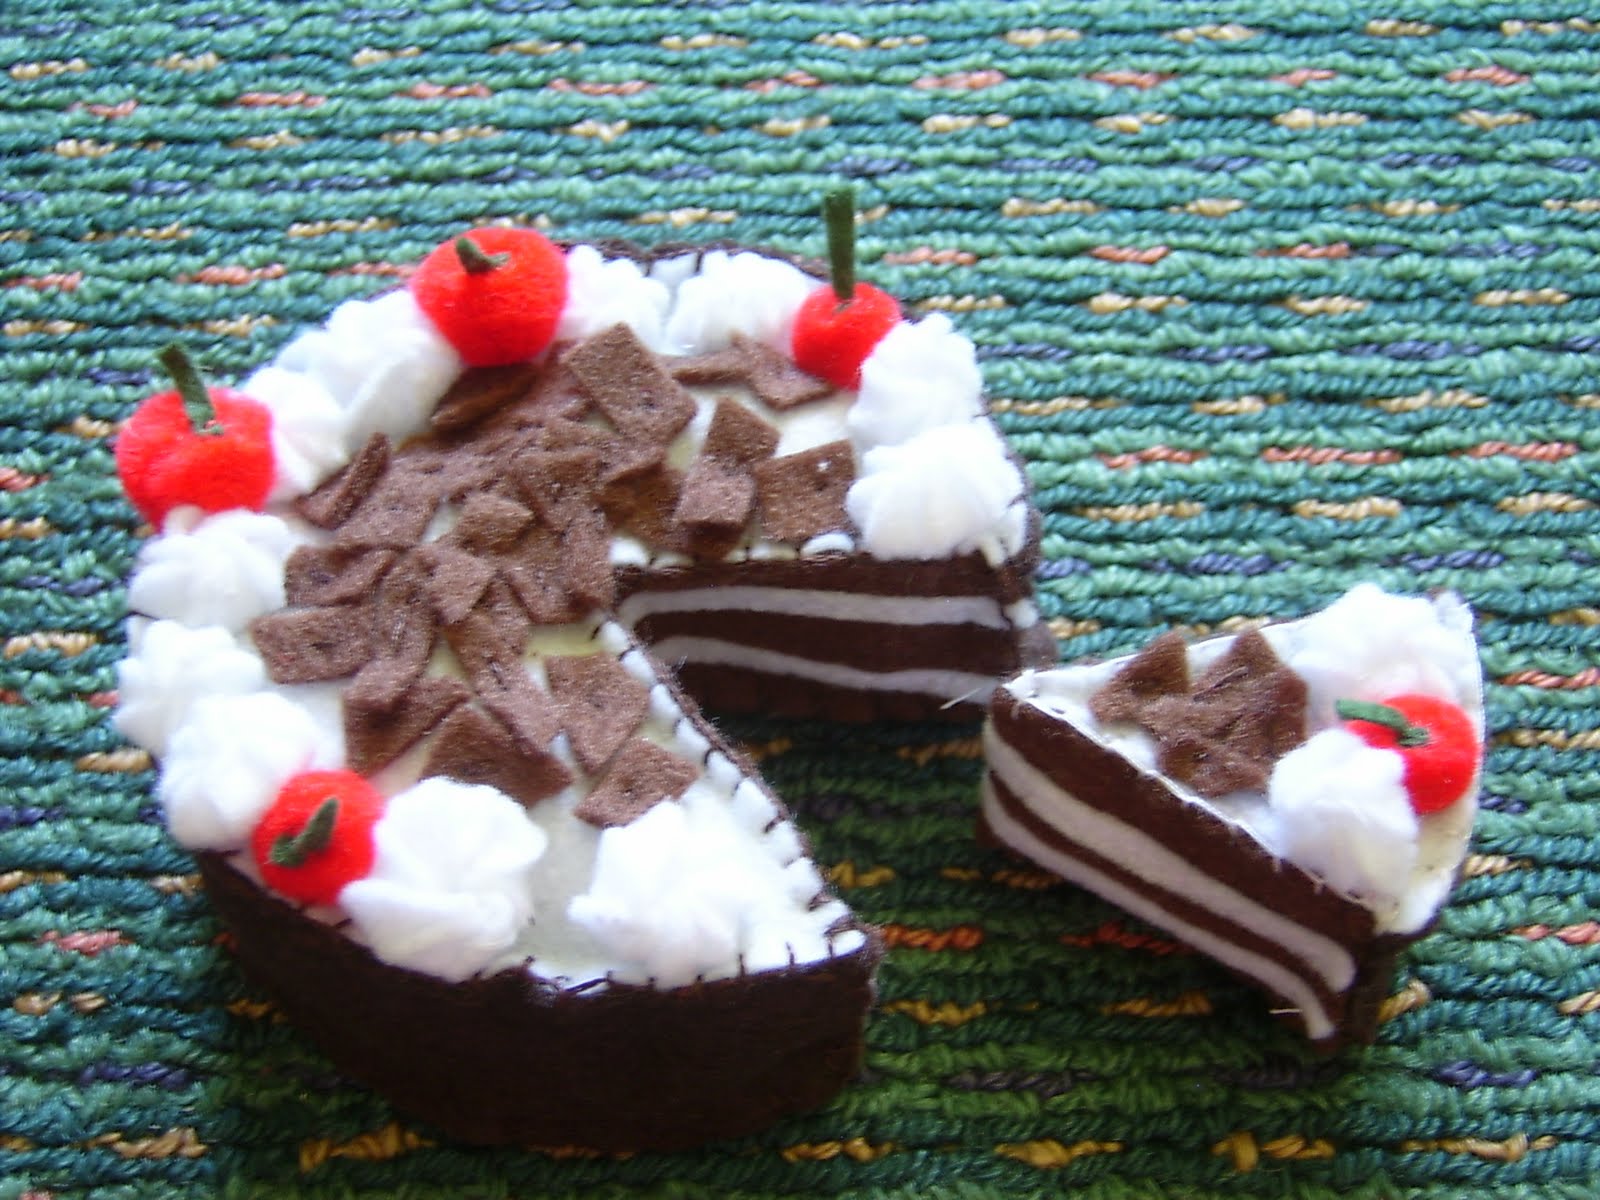 chocolate cake with strawberries and whipped cream these 2 felt cakes I made a while ago.